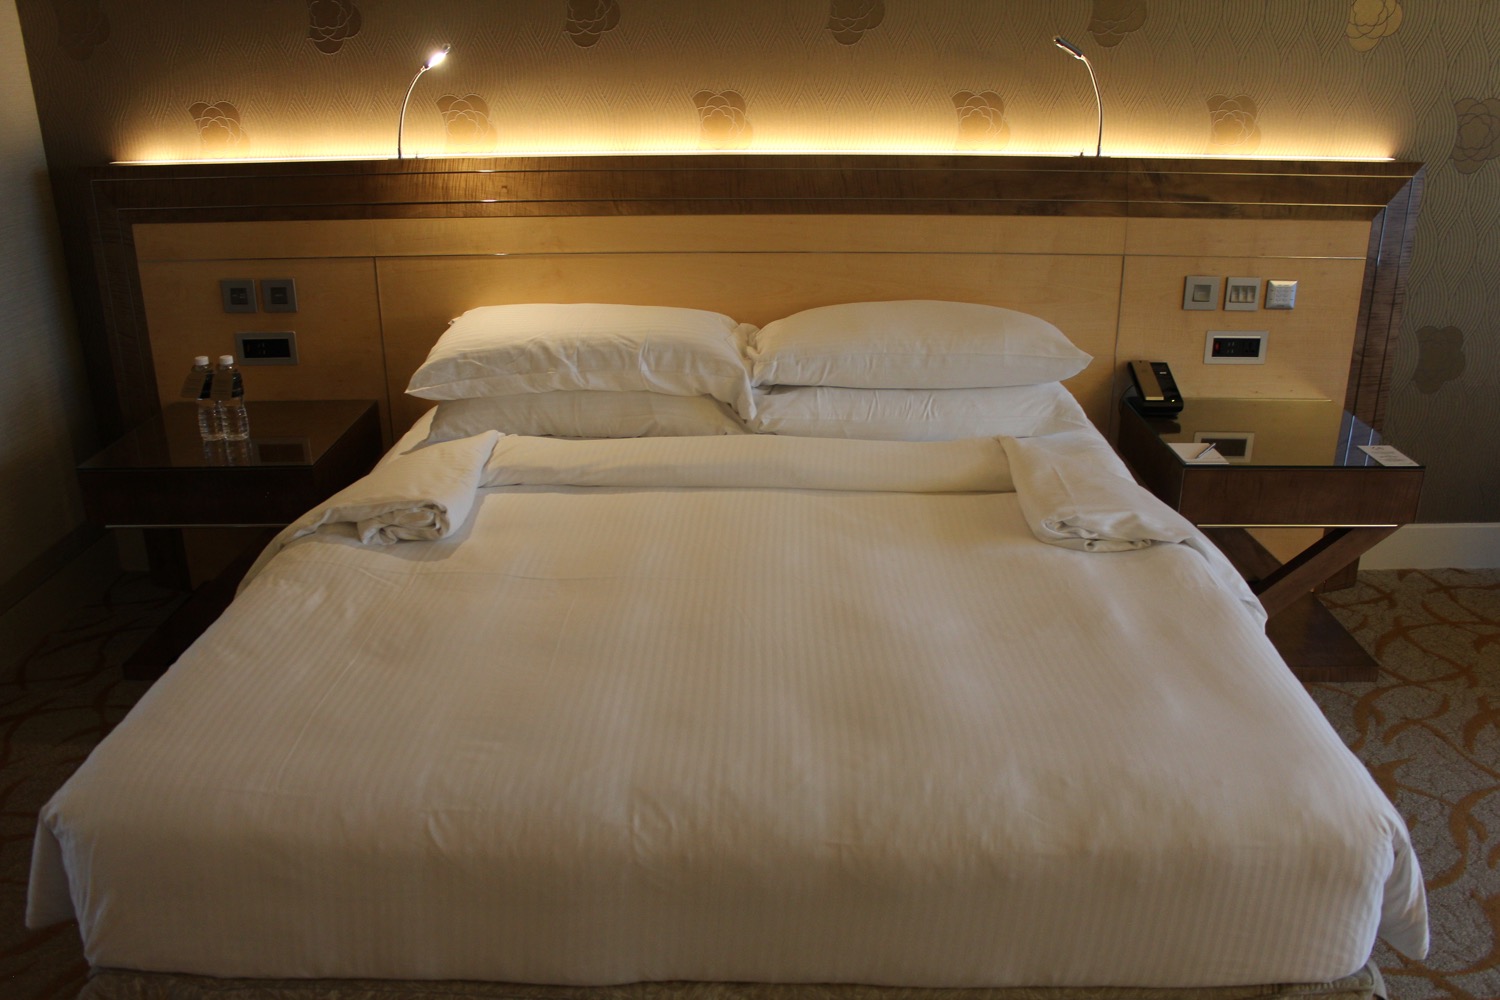 a bed with white sheets and pillows